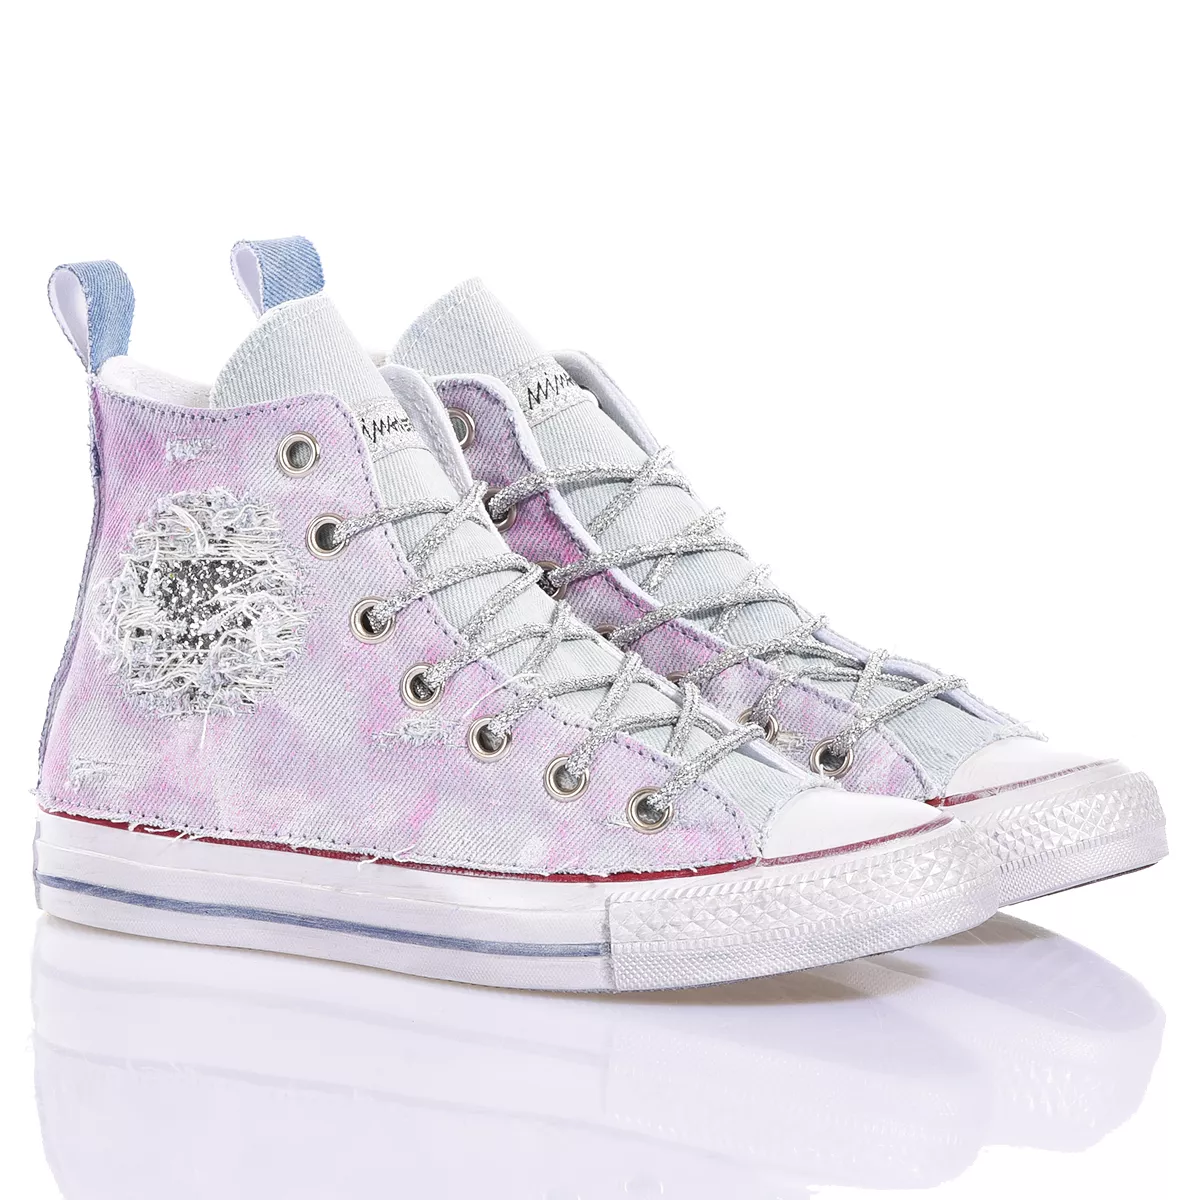 Converse Denim Glitter Chuck Taylor Hi Washed-out, Glitter, Special